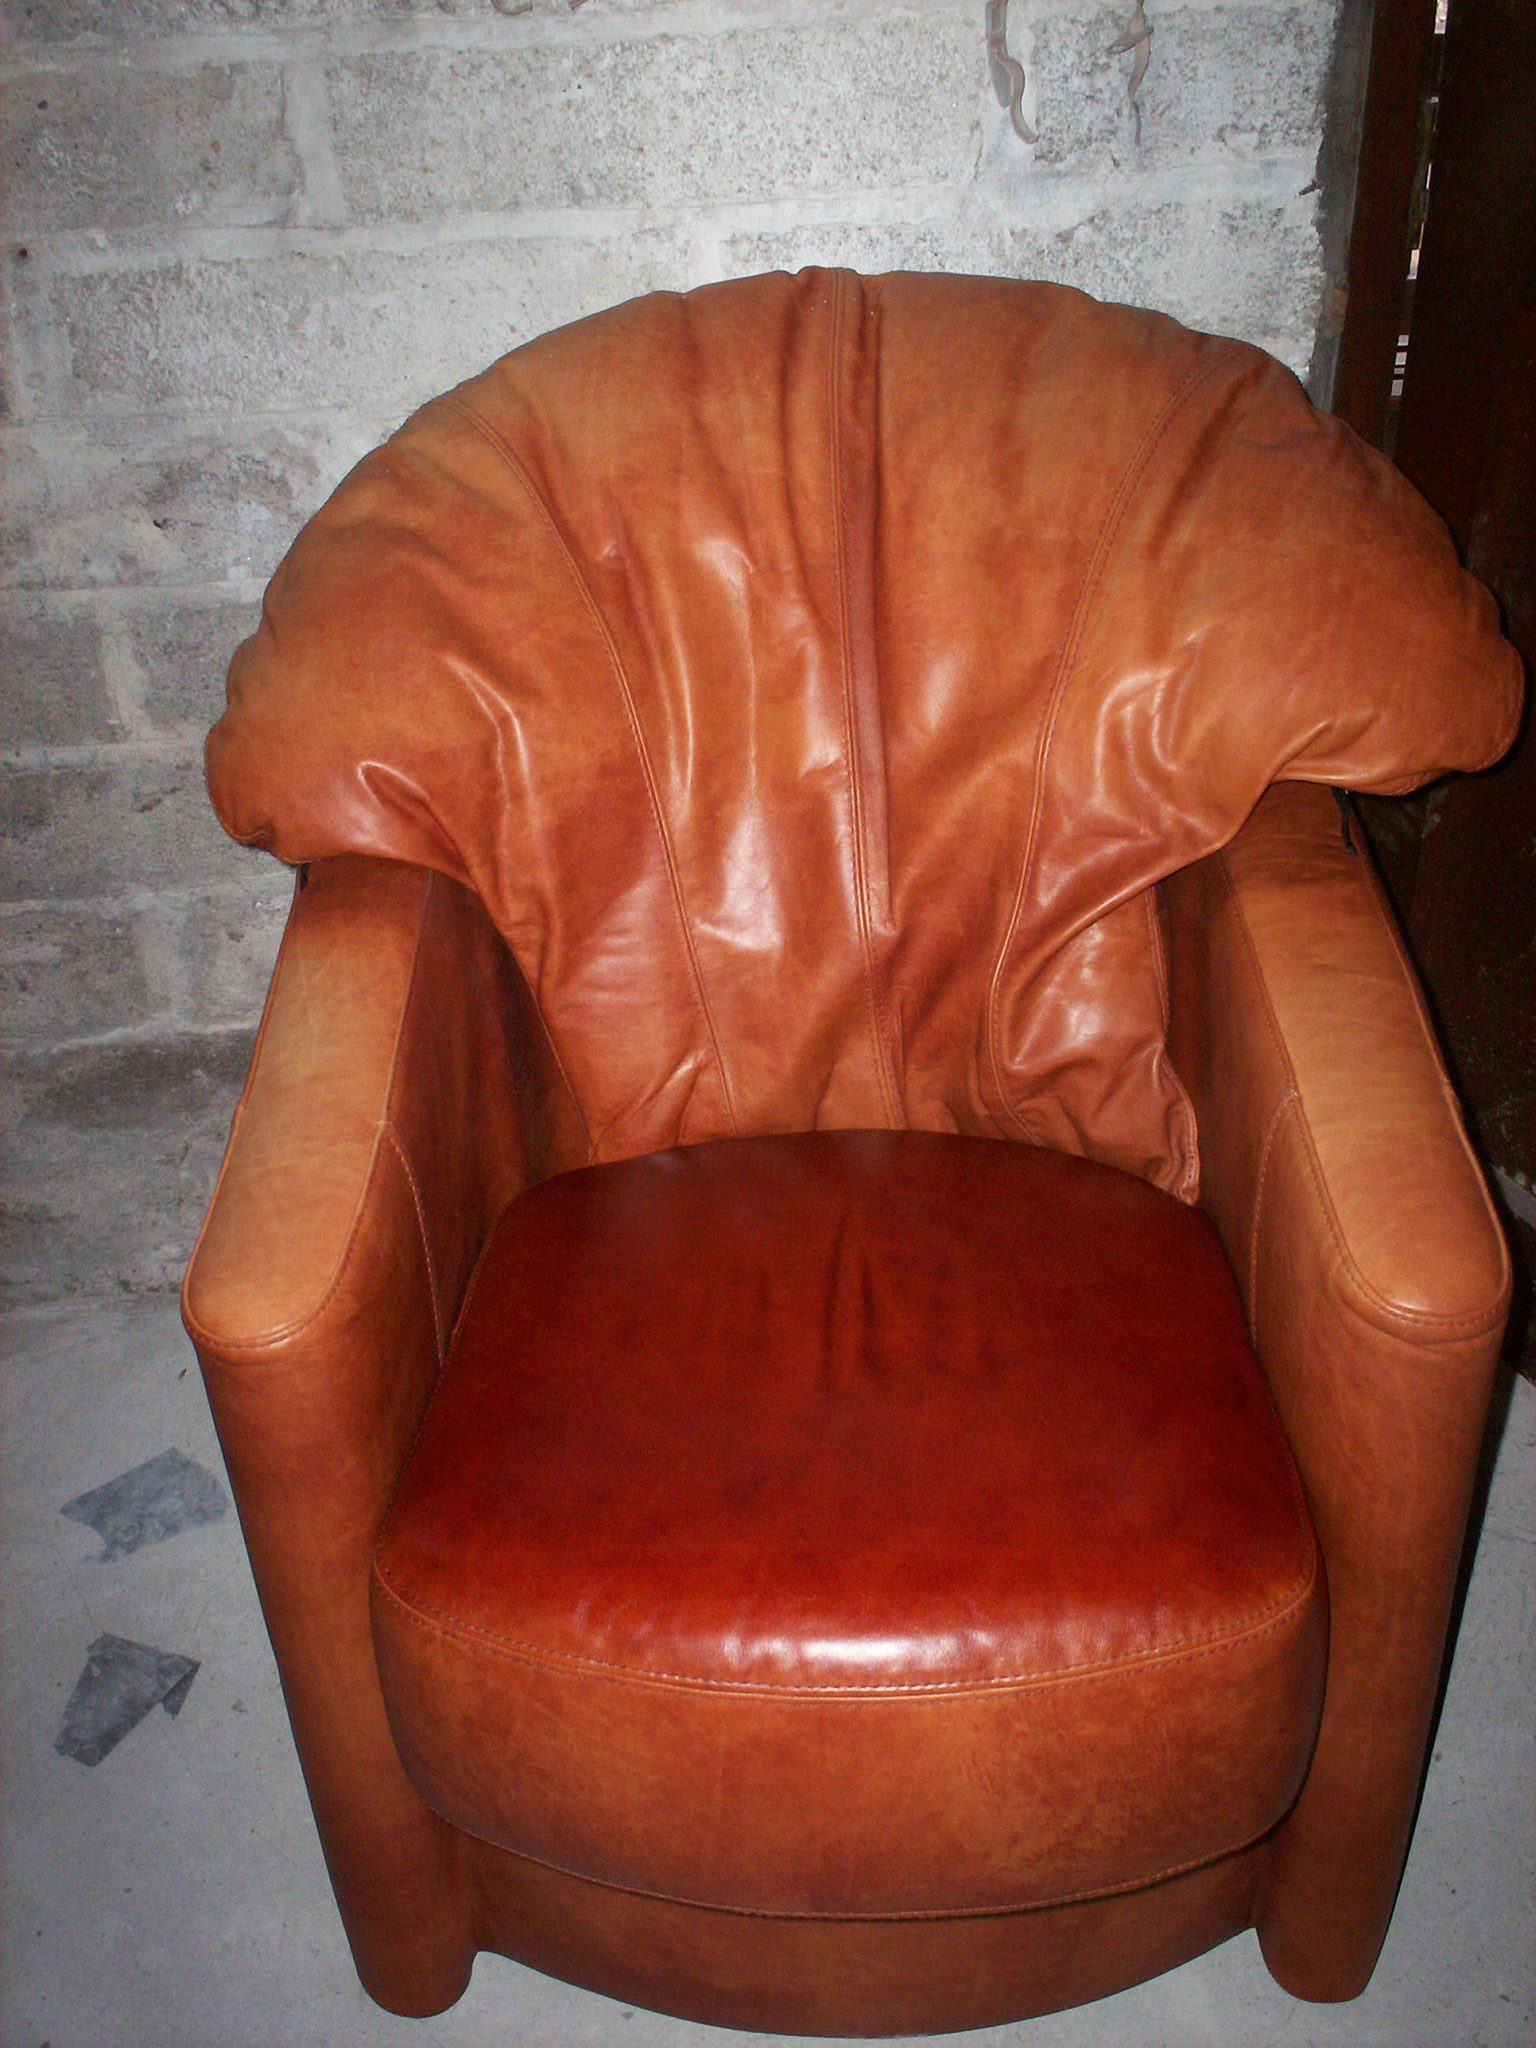 Aged and faded front of tub chair